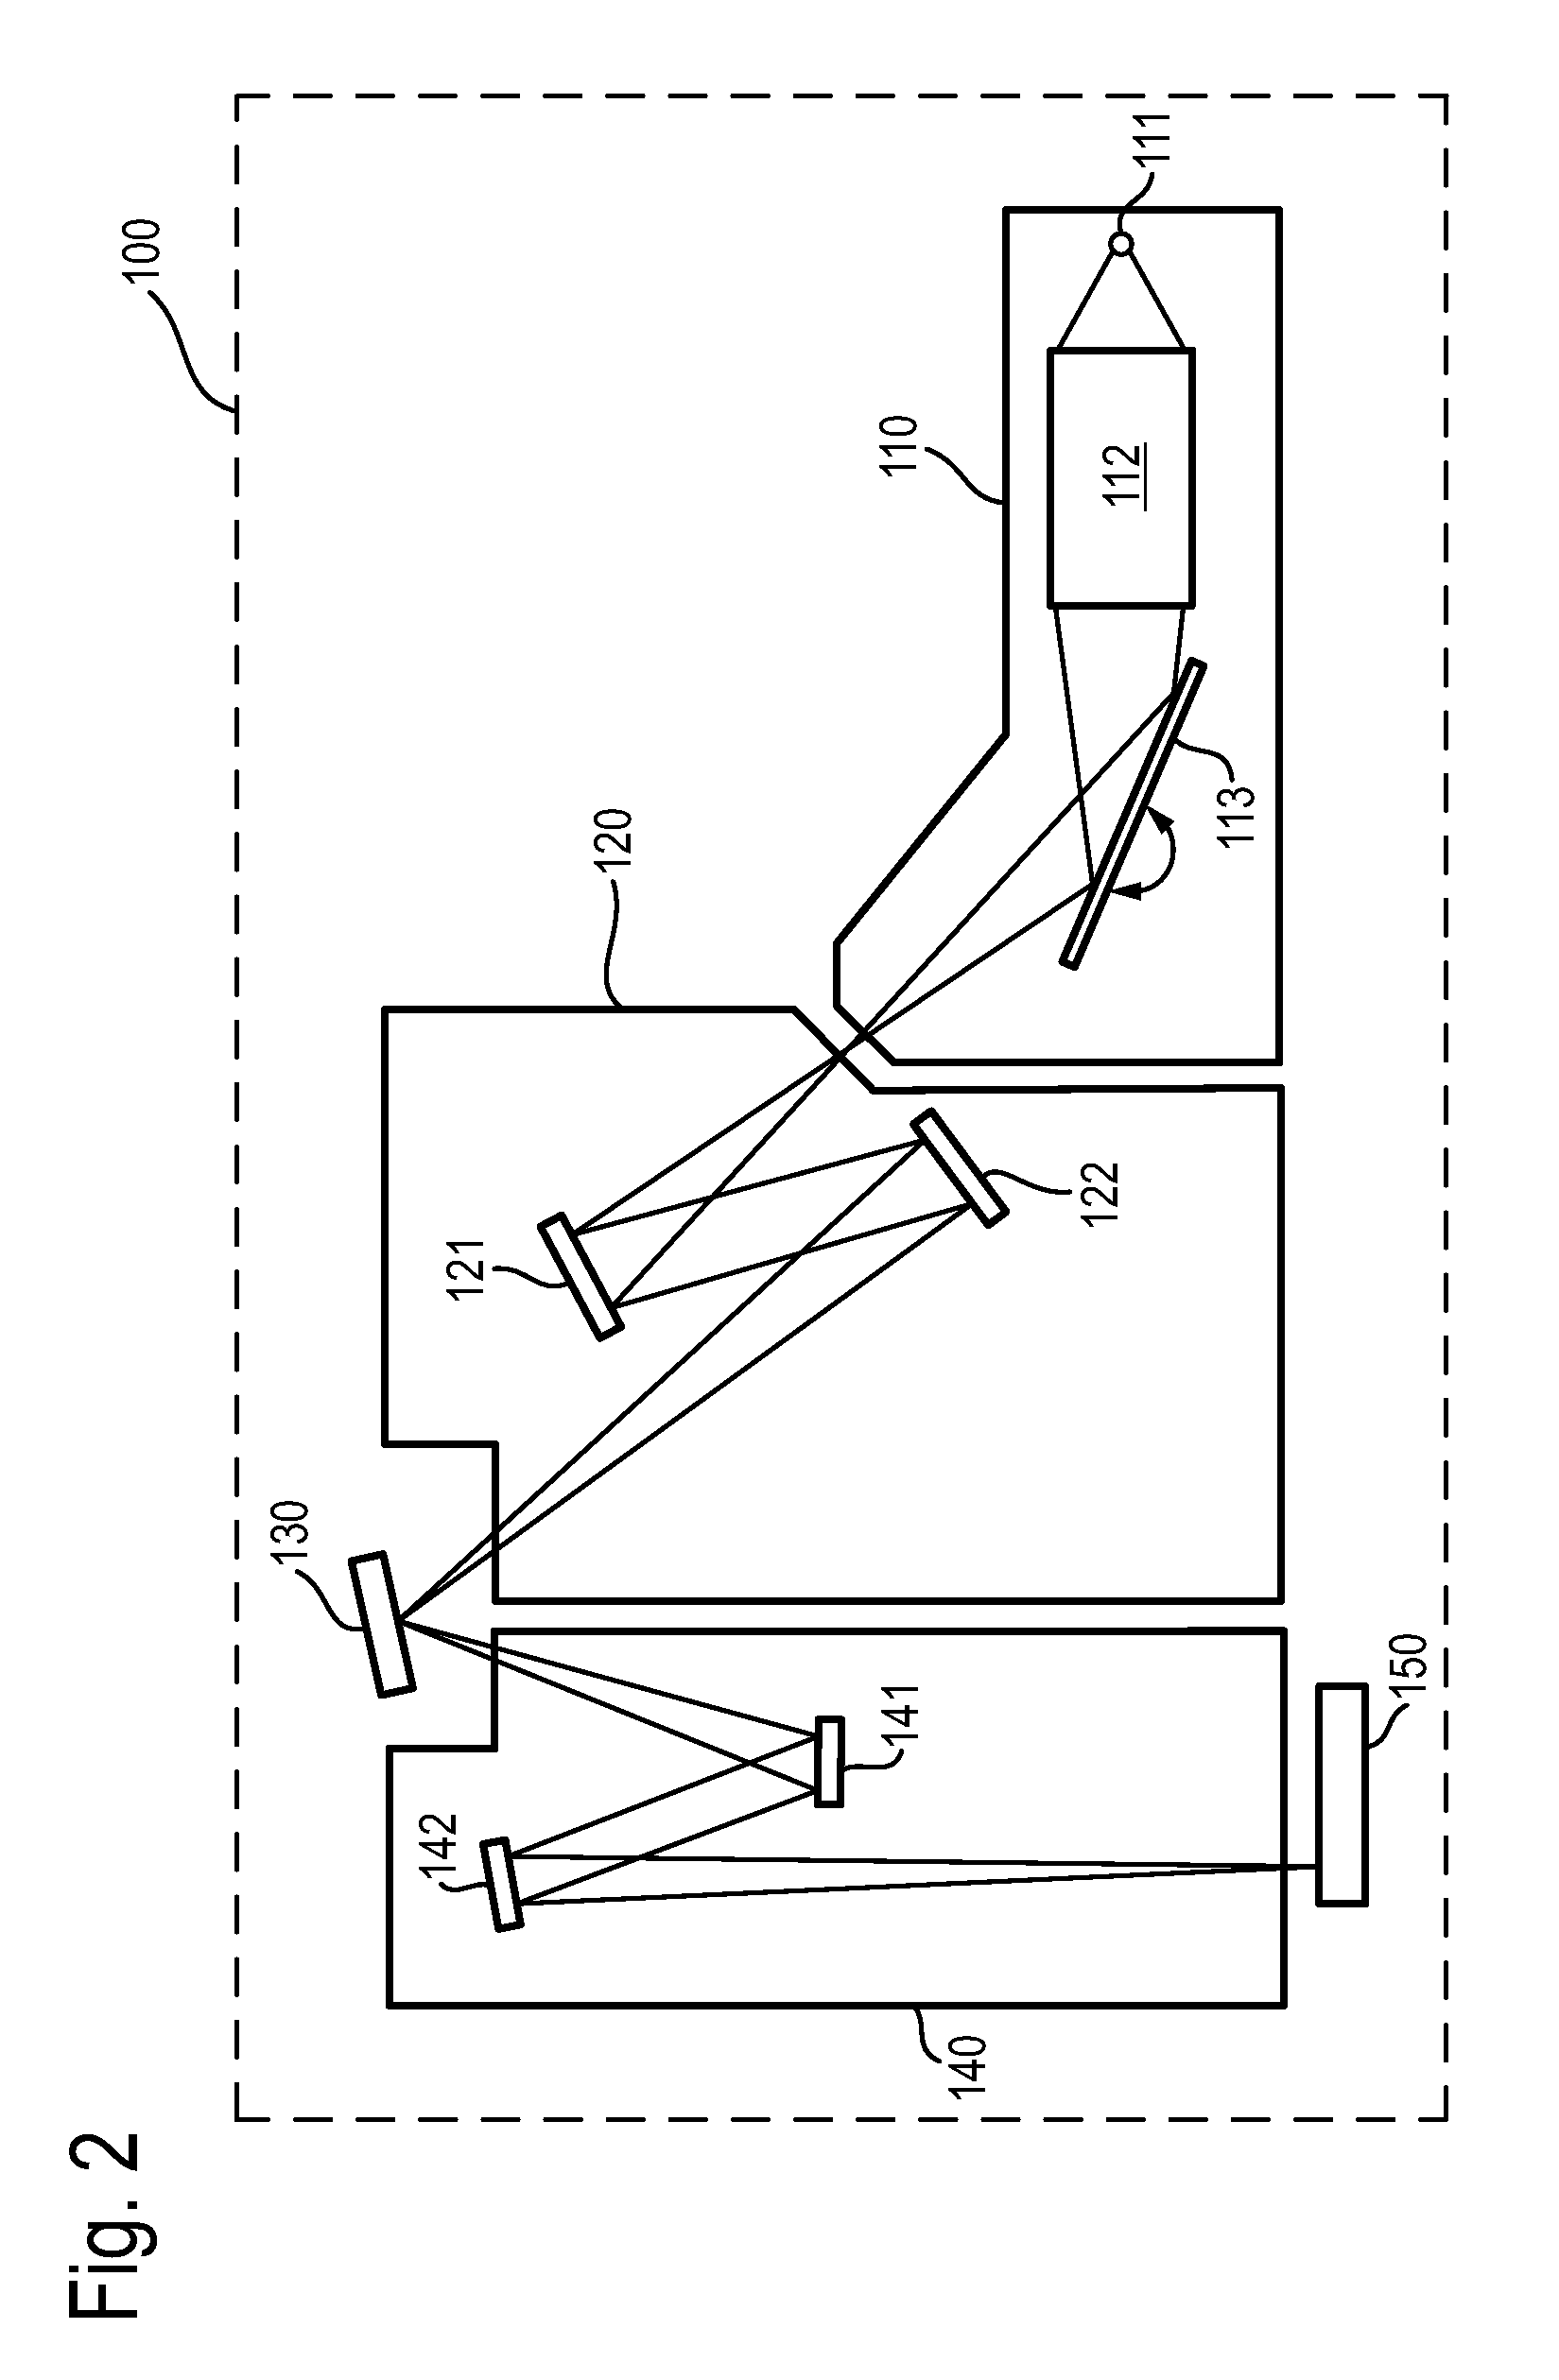 Component of an EUV or UV lithography apparatus and method for producing it